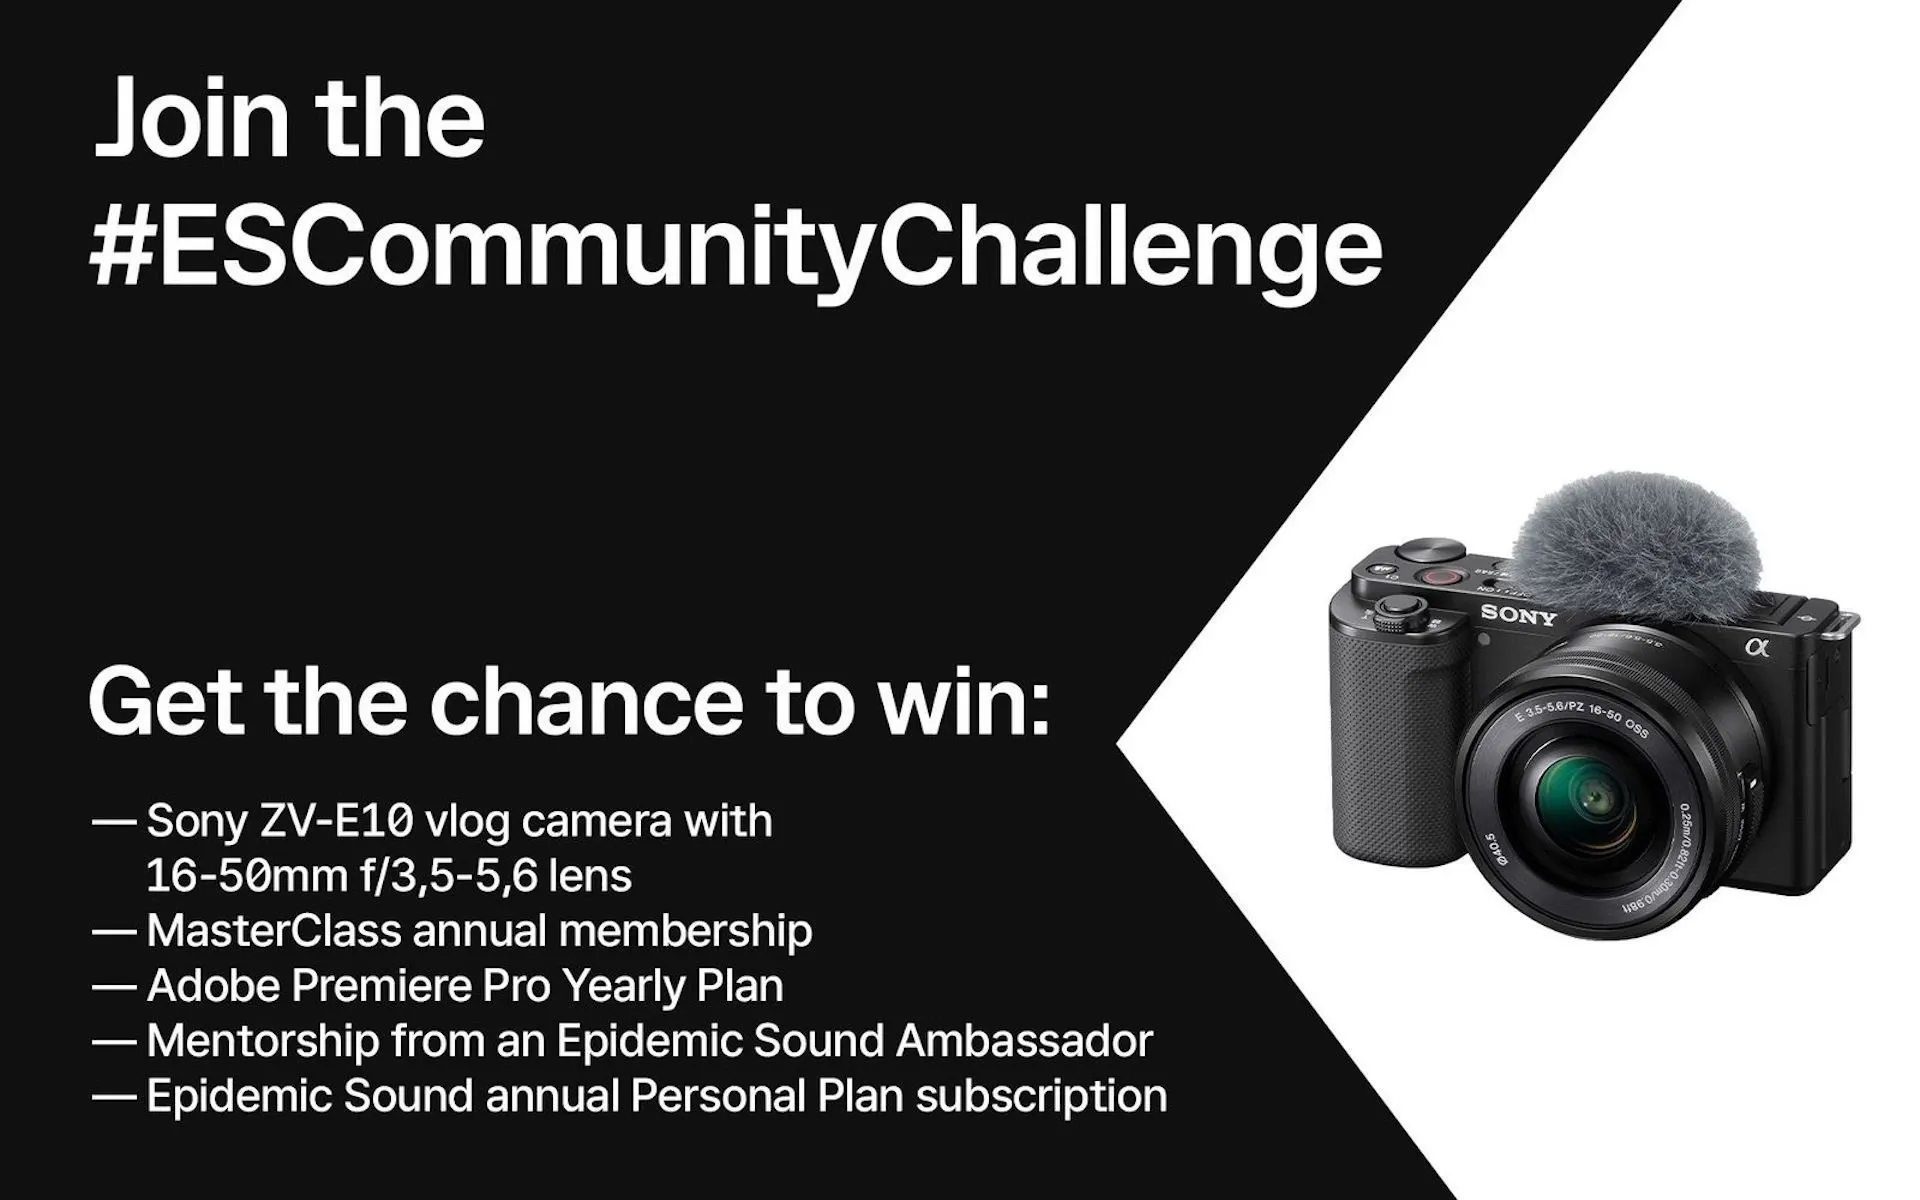 Join the Epidemic Sound Community Challenge 